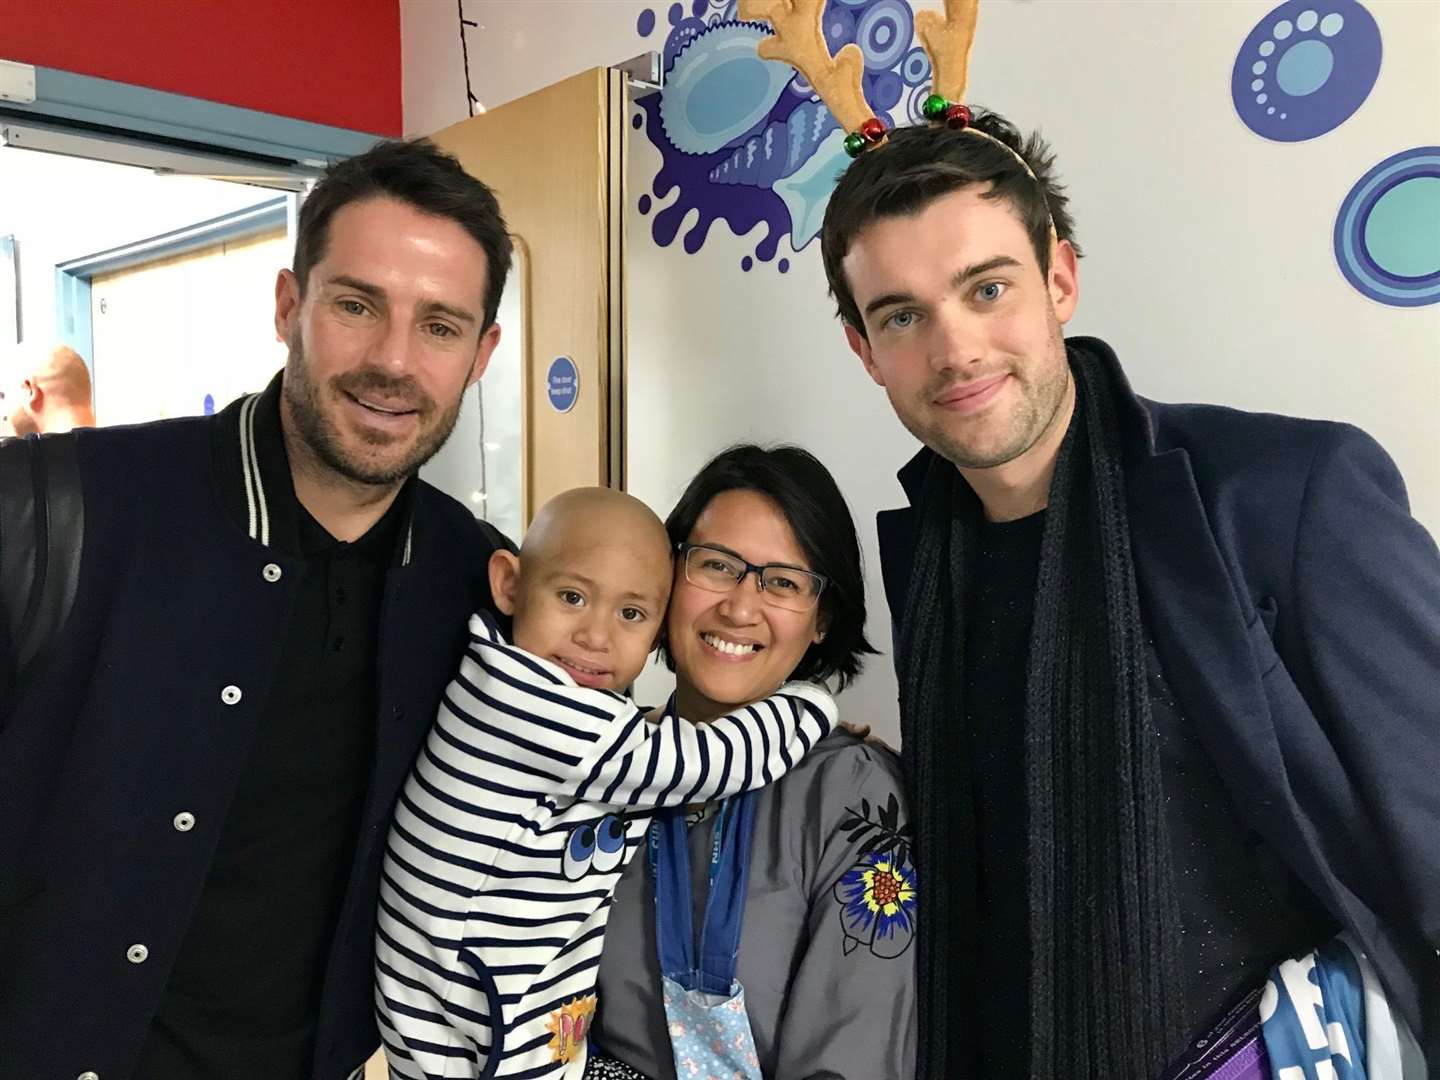 Maya and mum Dellanie with Jamie Redknapp and Jack Whitehall in hospital